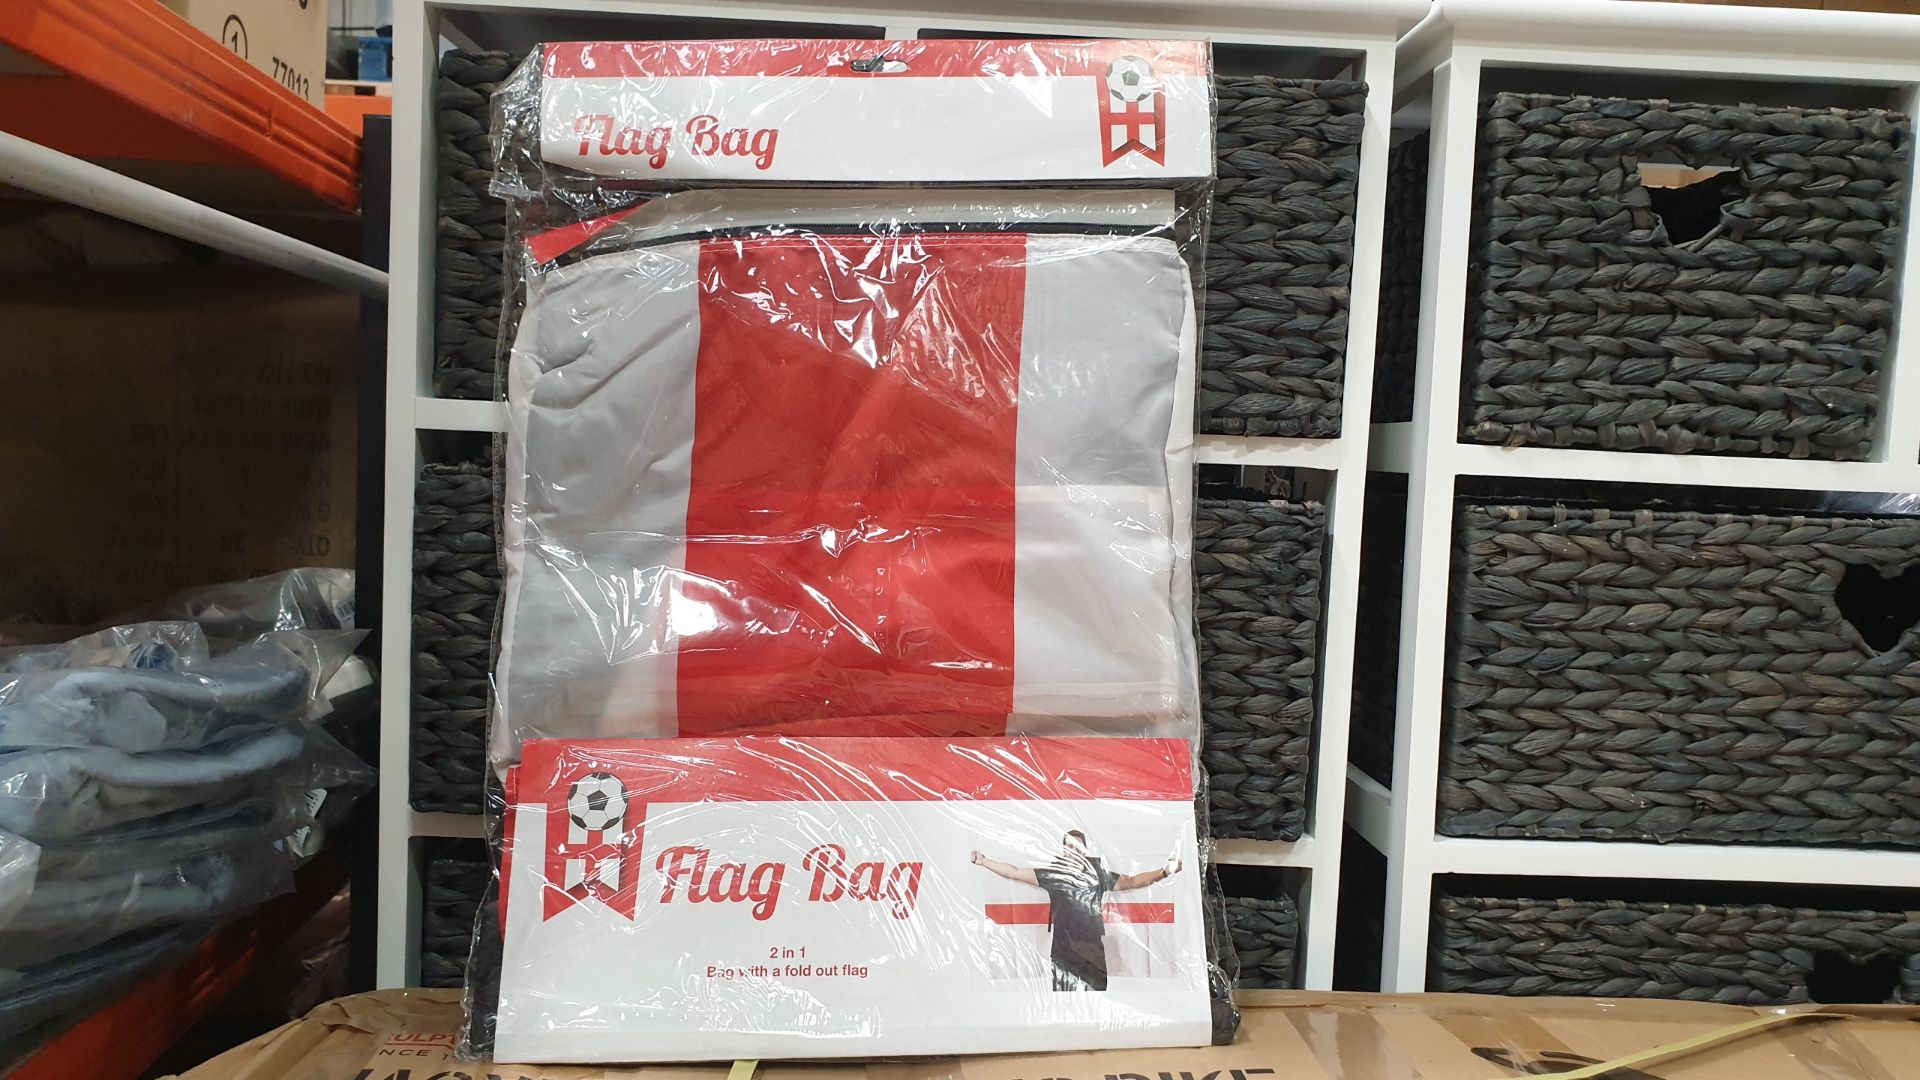 72 X BRAND NEW SAMBRO INTERNATIONAL ENGLAND FLAG BAGS (2IN1) INCLUDES FALL OUT FLAG OIN 3 BOXES